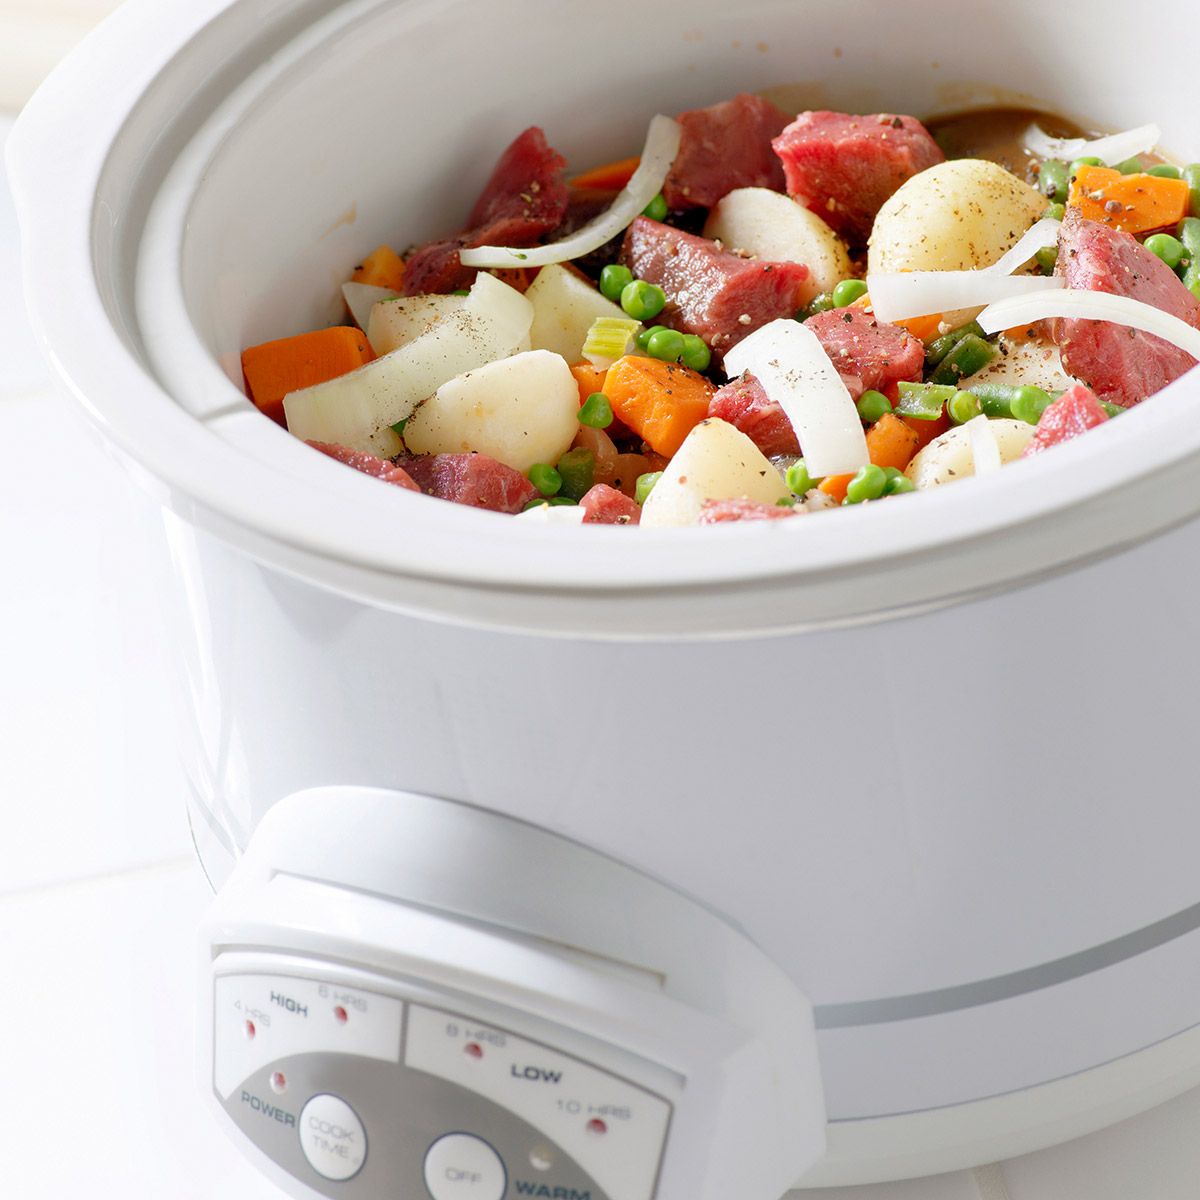 CROCK-ETTE Small Crockpot by RIVAL; STONEWARE SLOW COOKER, WORKS GOOD!